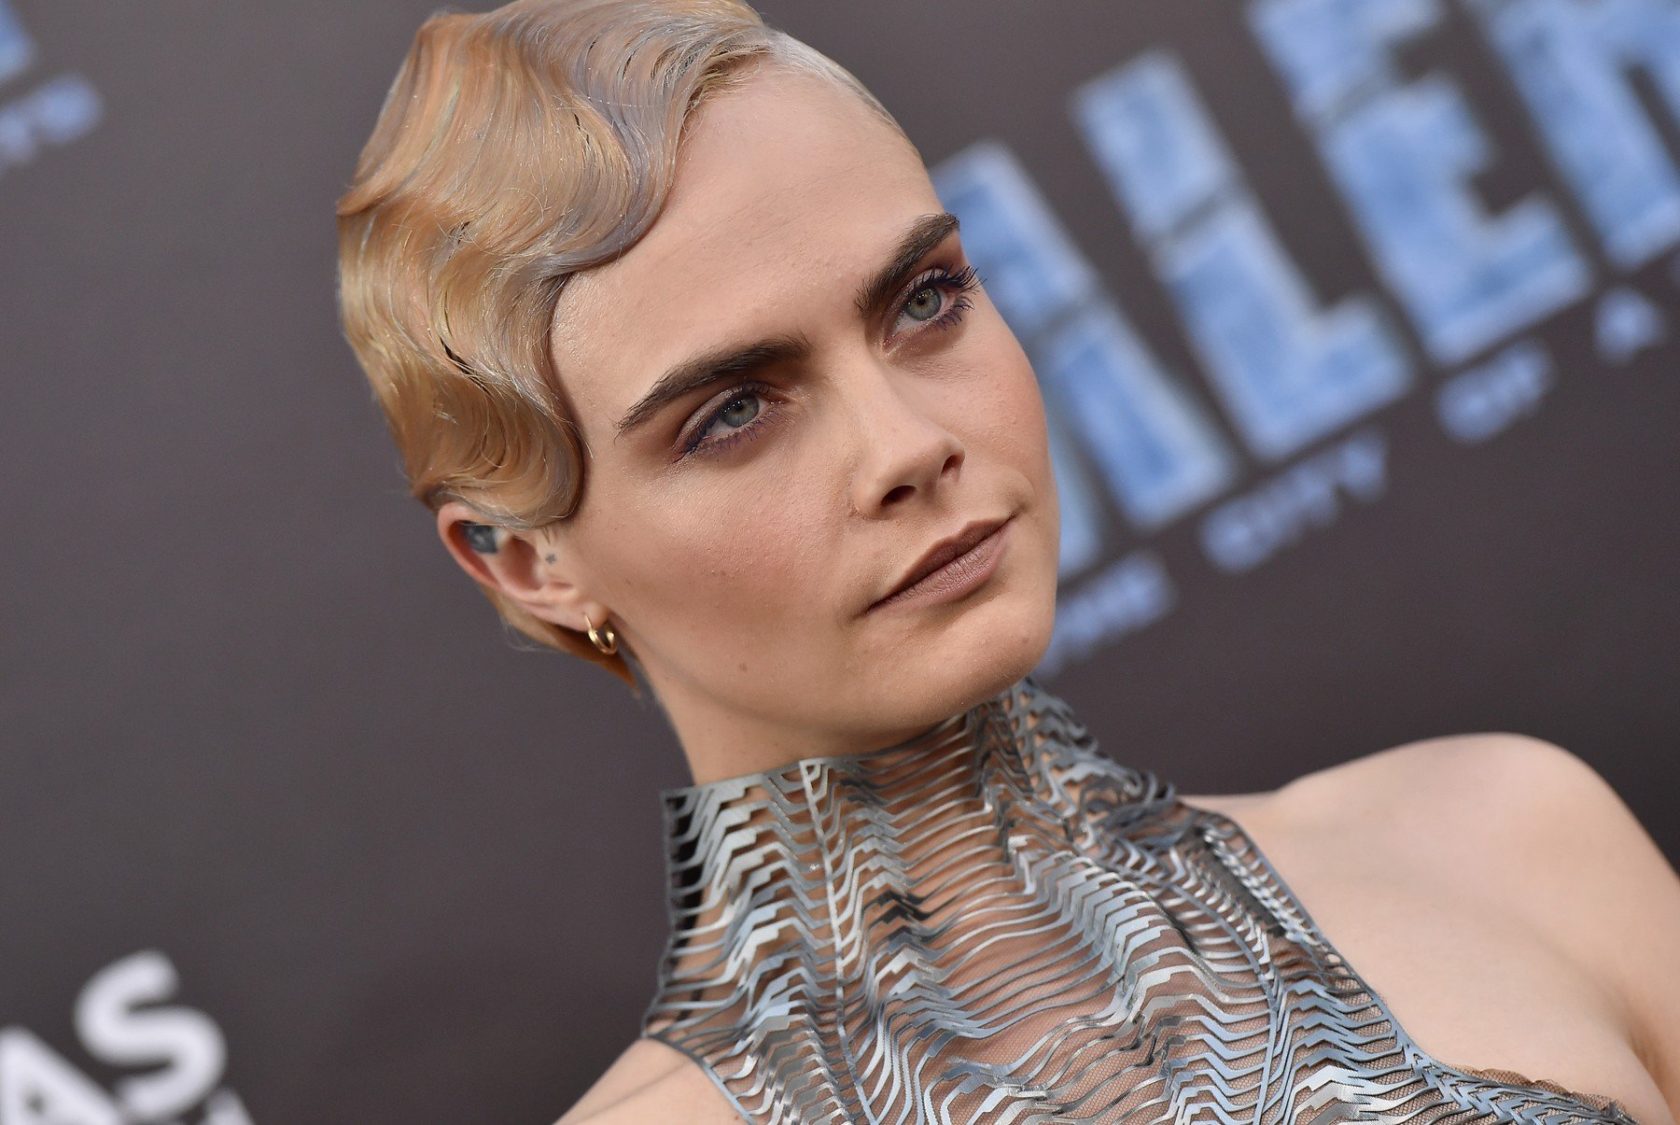 World Premiere of "Valerian and the City of a Thousand Planets". TCL Chinese Theatre, Hollywood, California. Pictured: Cara Delevingne. EVENT July 17, 2017 Job: 170717A1, Image: 342268204, License: Rights-managed, Restrictions: 000, Model Release: no, Credit line: Profimedia, Bauer Griffin